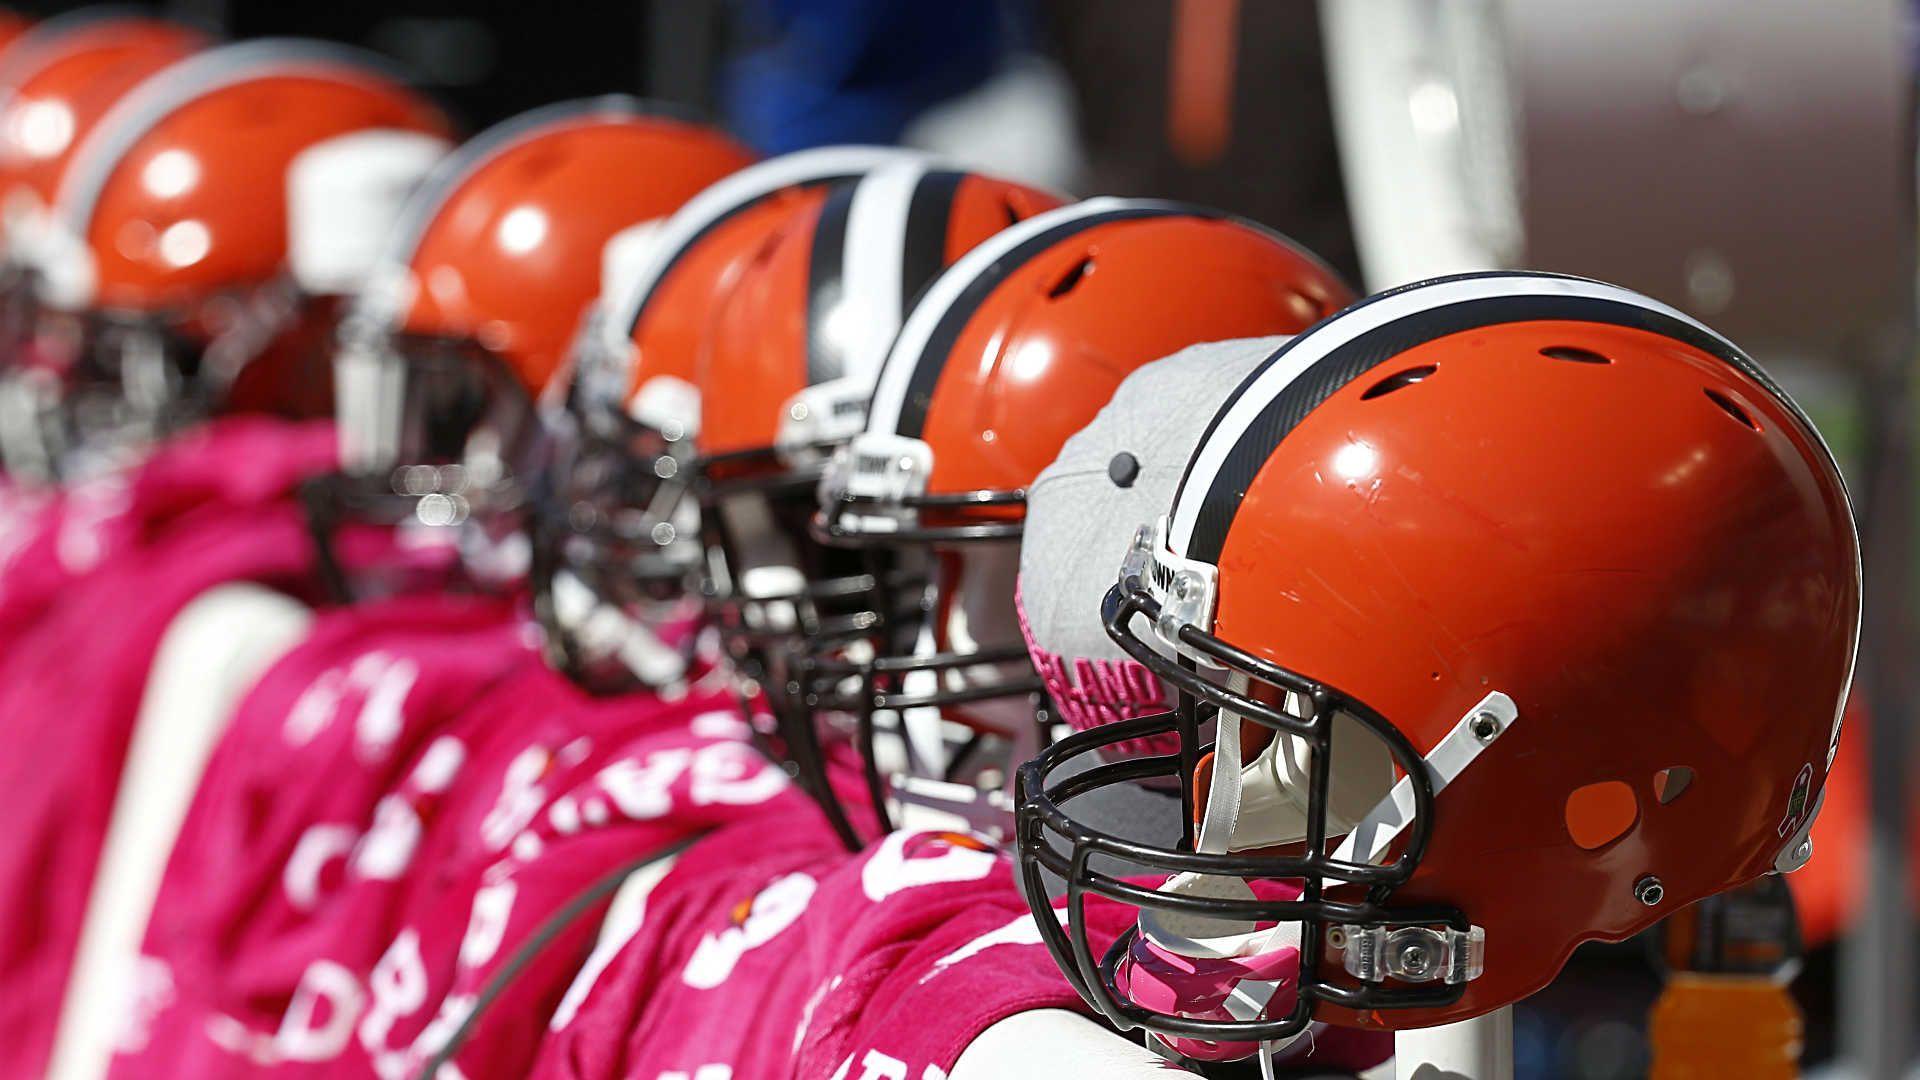 NFL Draft 2016: Browns willing to trade No. 2 overall pick, report